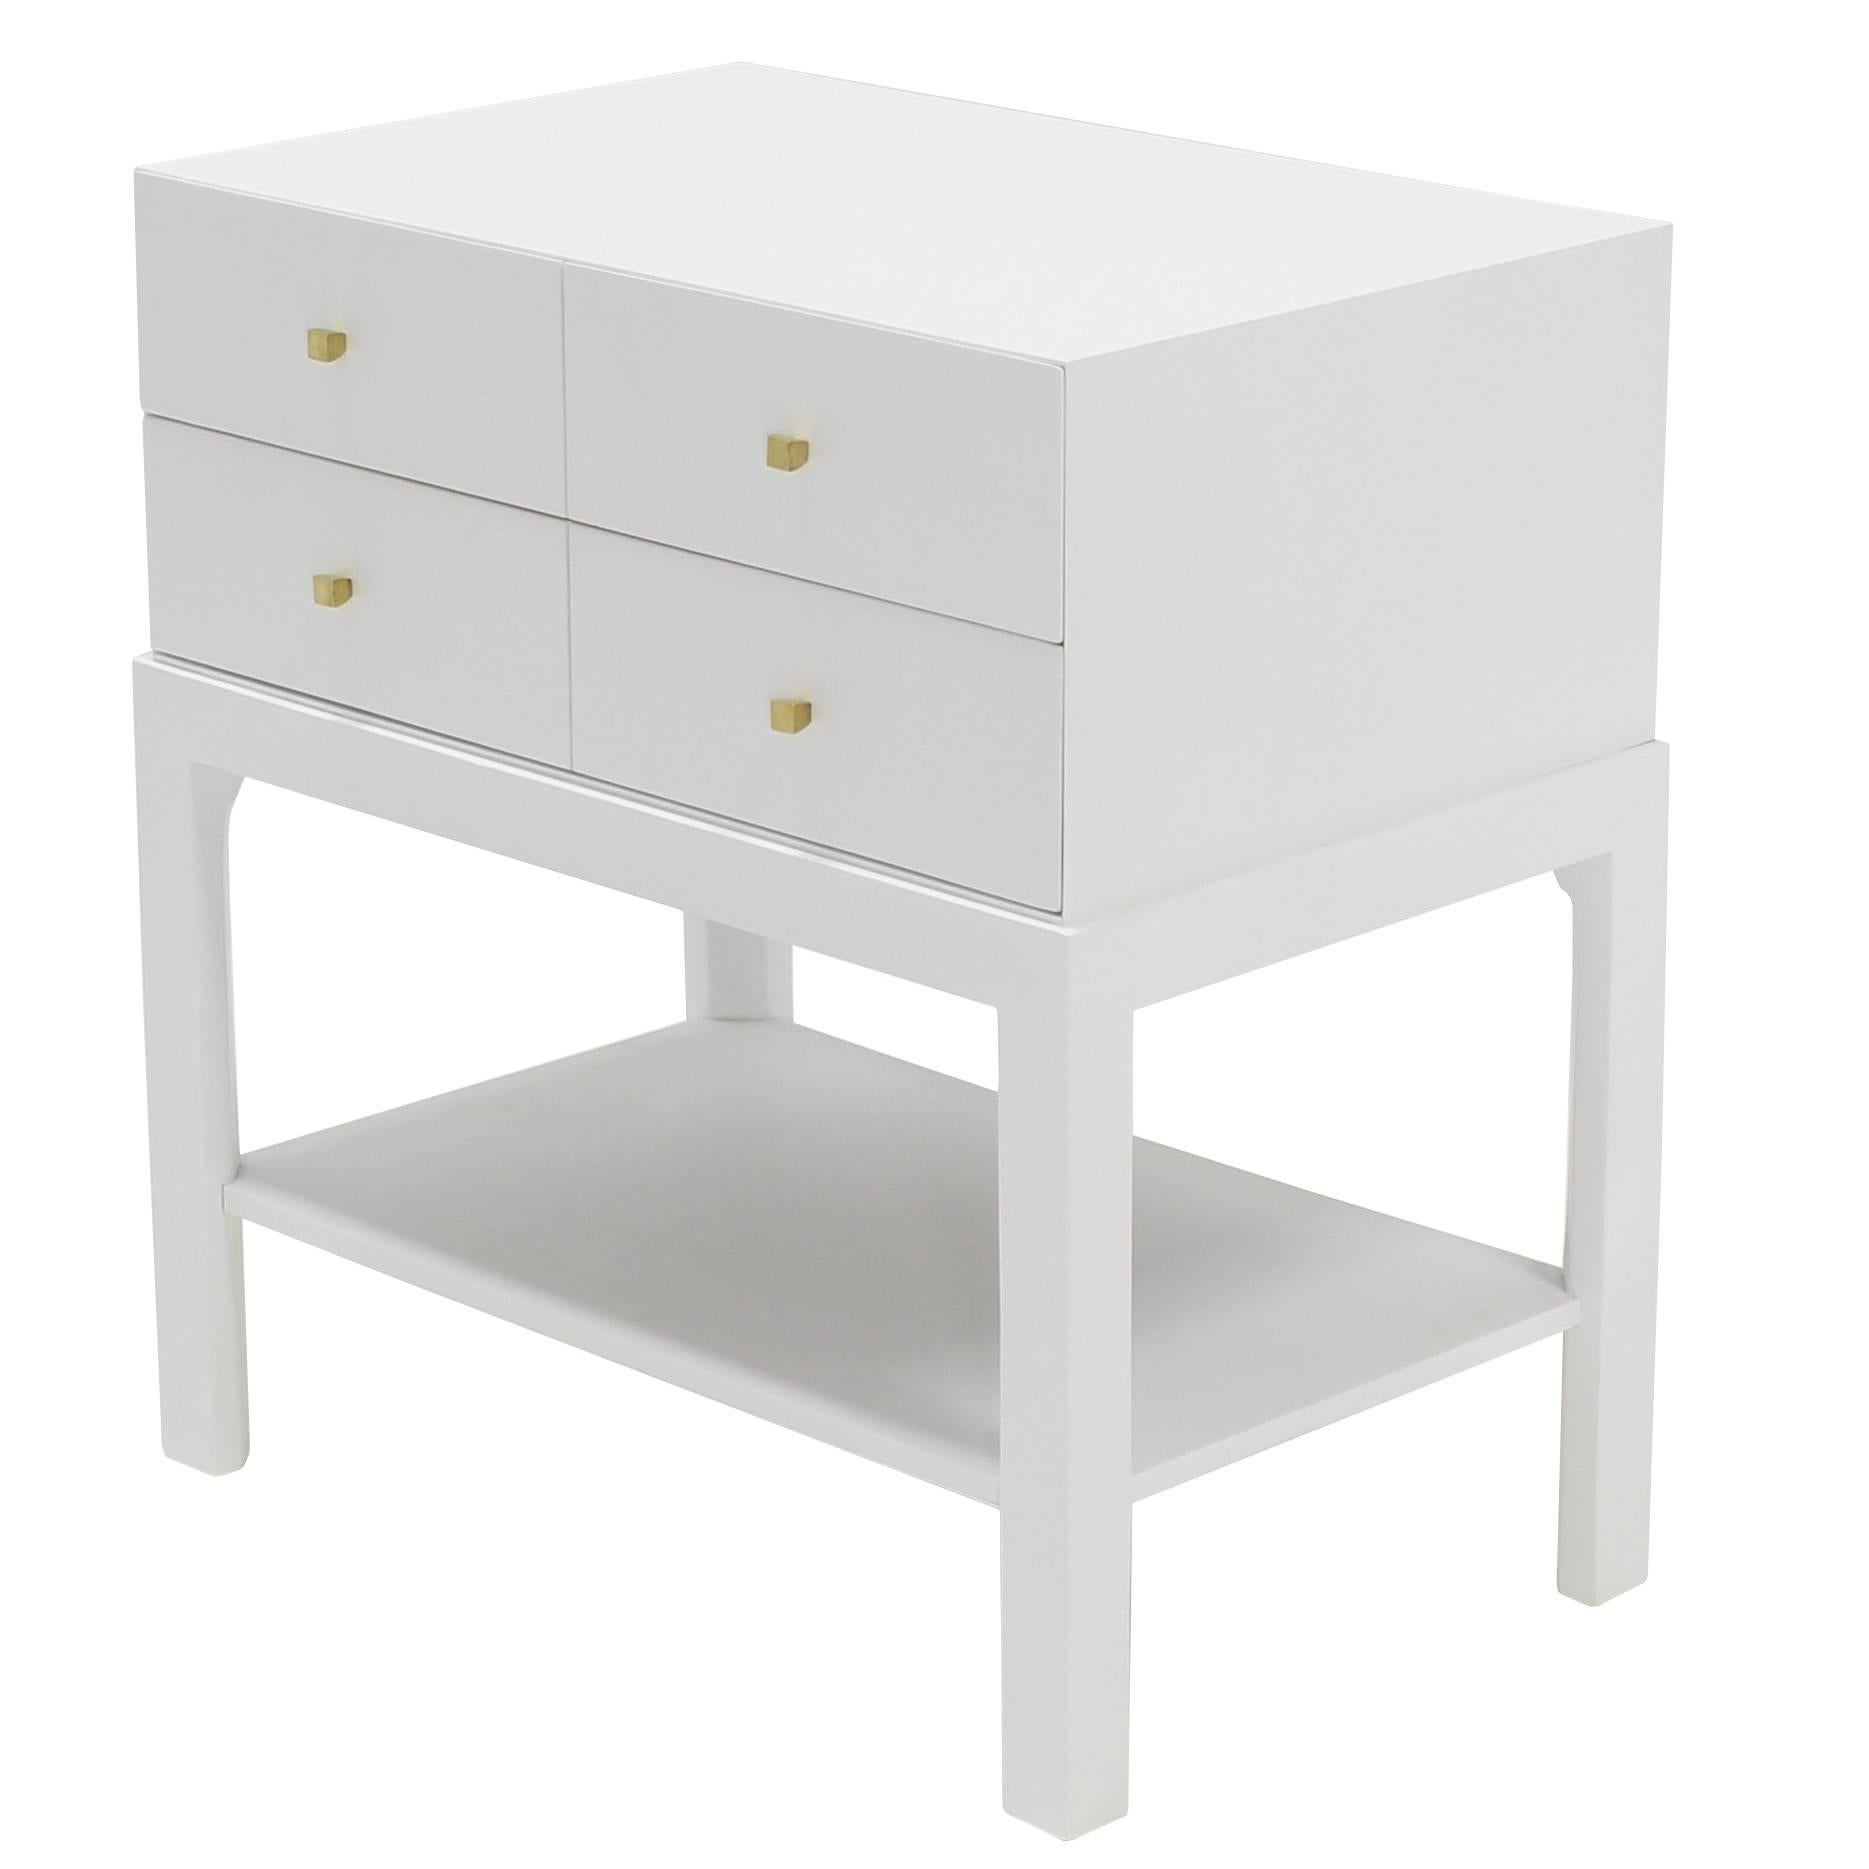 White Lacquer Diamond Shape Brass Dimond Pulls Two Drawer Nightstand For Sale